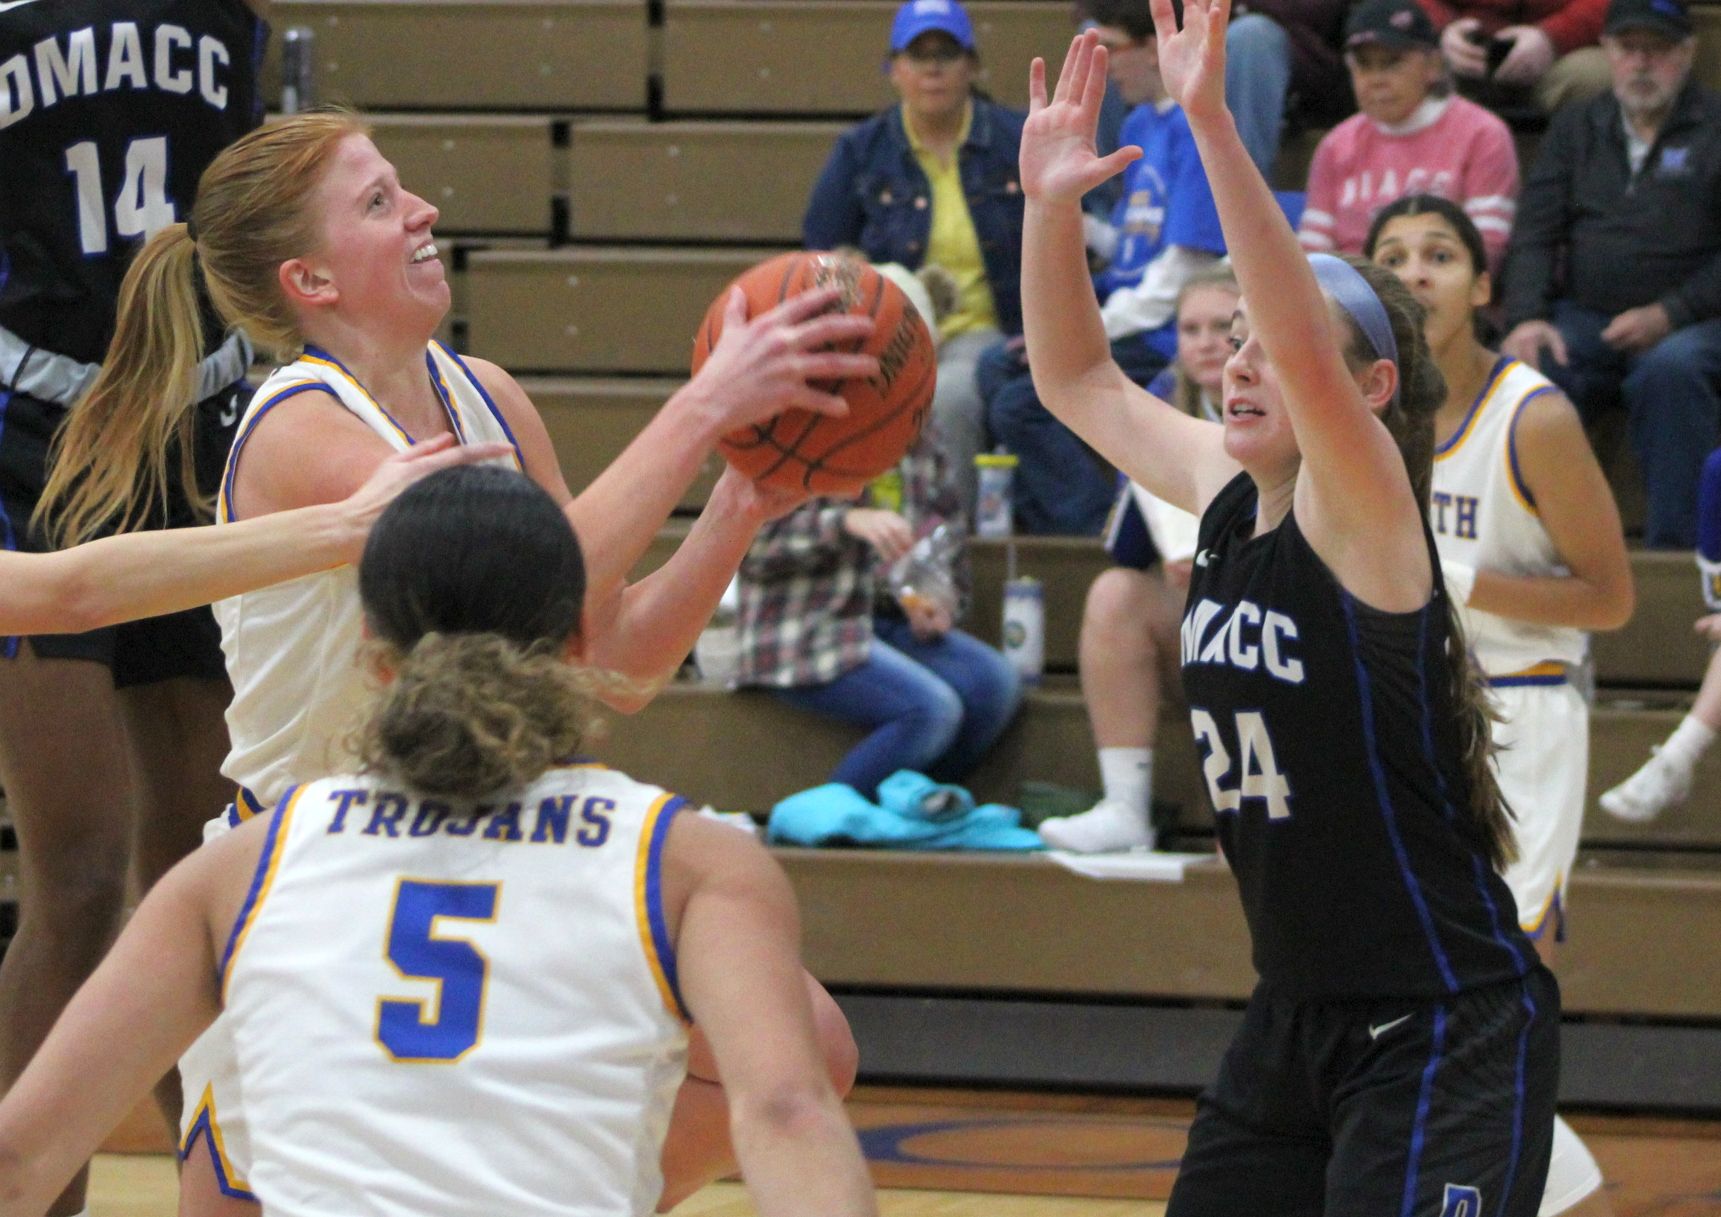 NIACC's Jackie Pippett drives to the basket in a game against DMACC earlier this season.